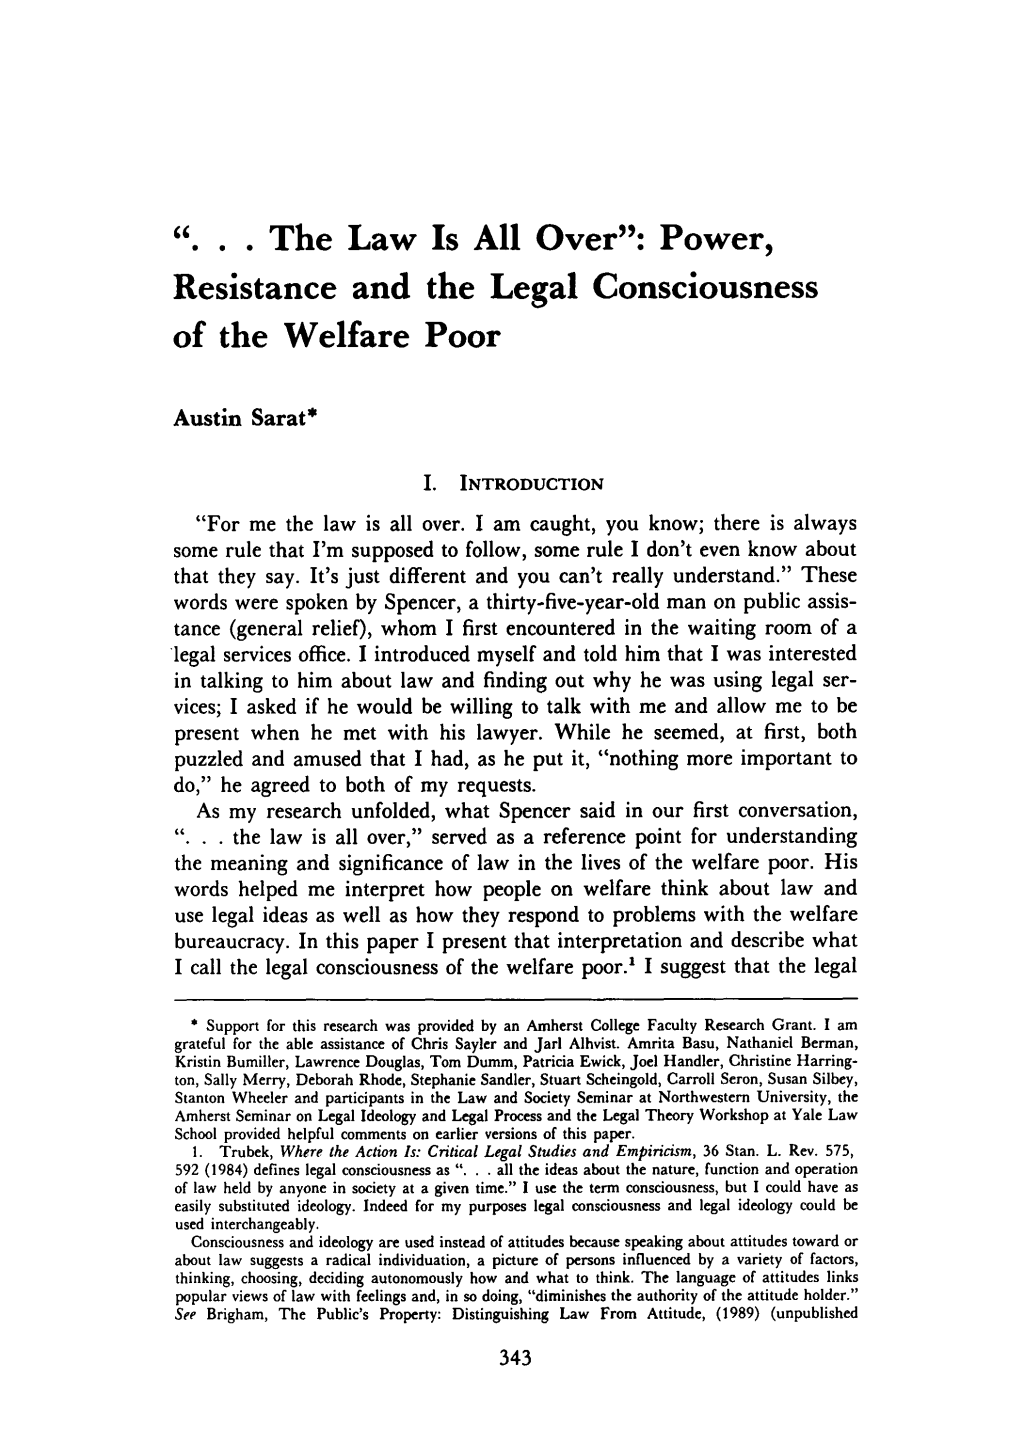 ".. the Law Is All Over": Power, Resistance and the Legal Consciousness of the Welfare Poor